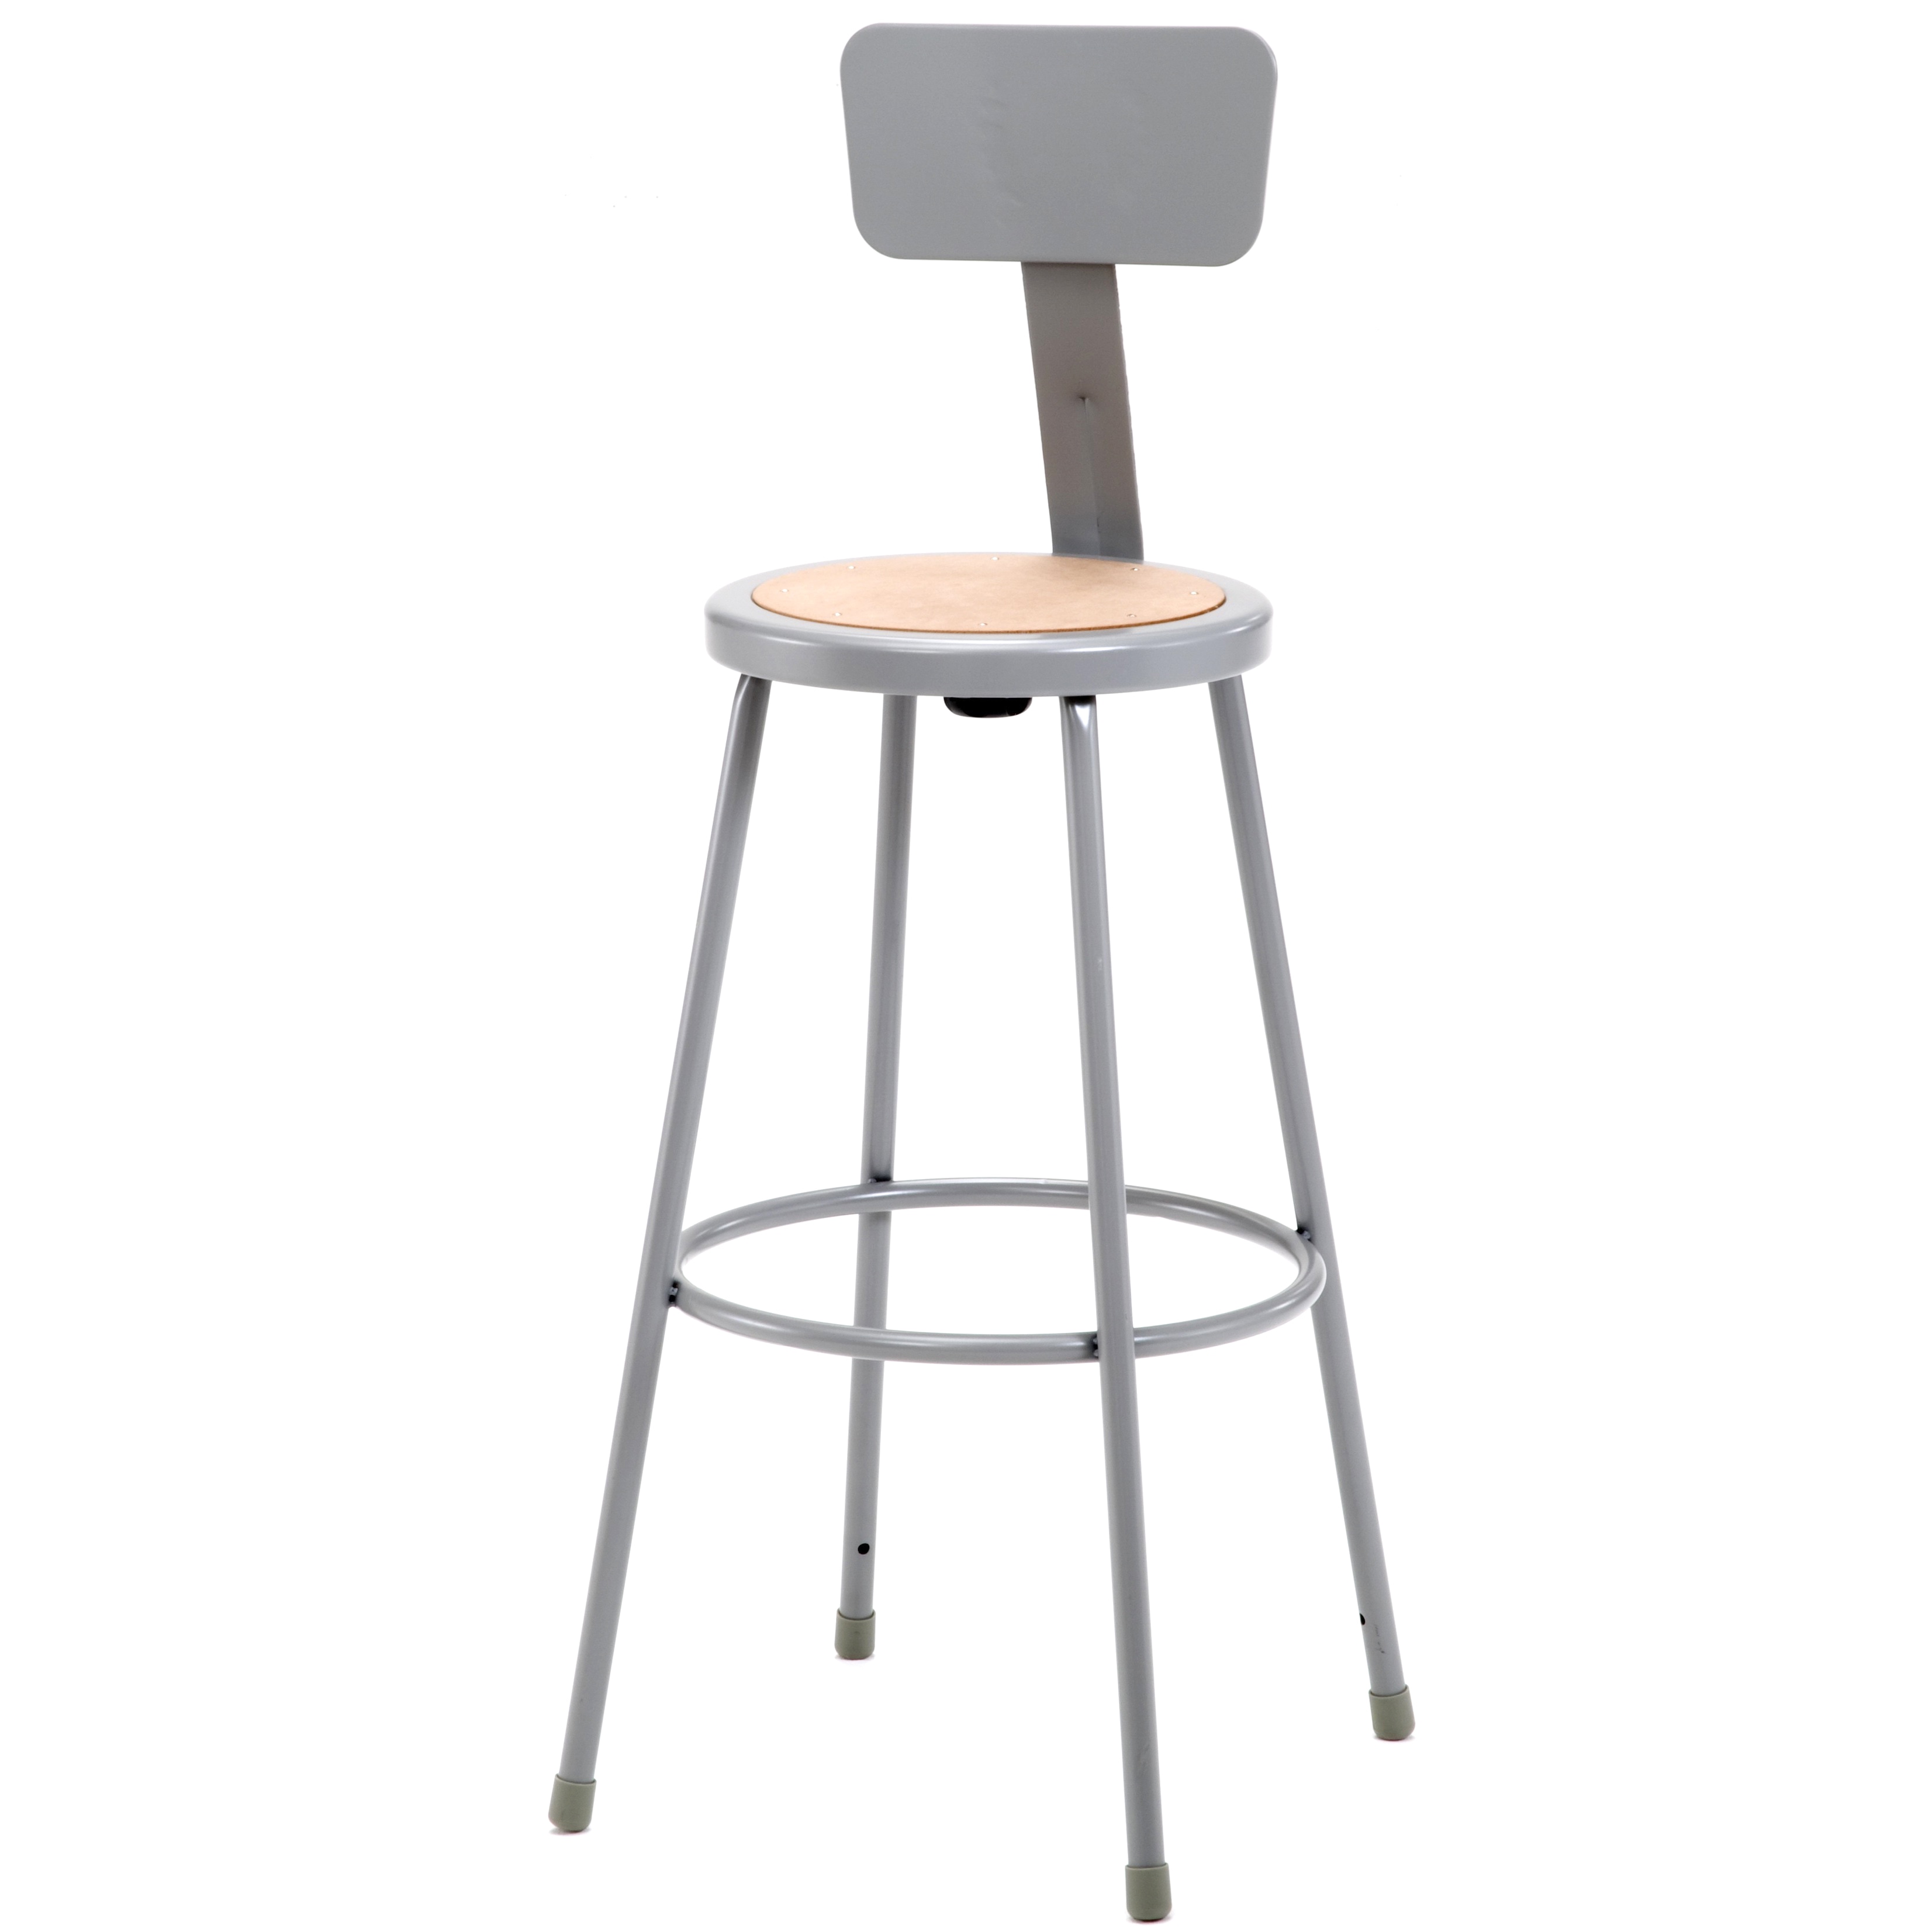 18 inch wooden stools